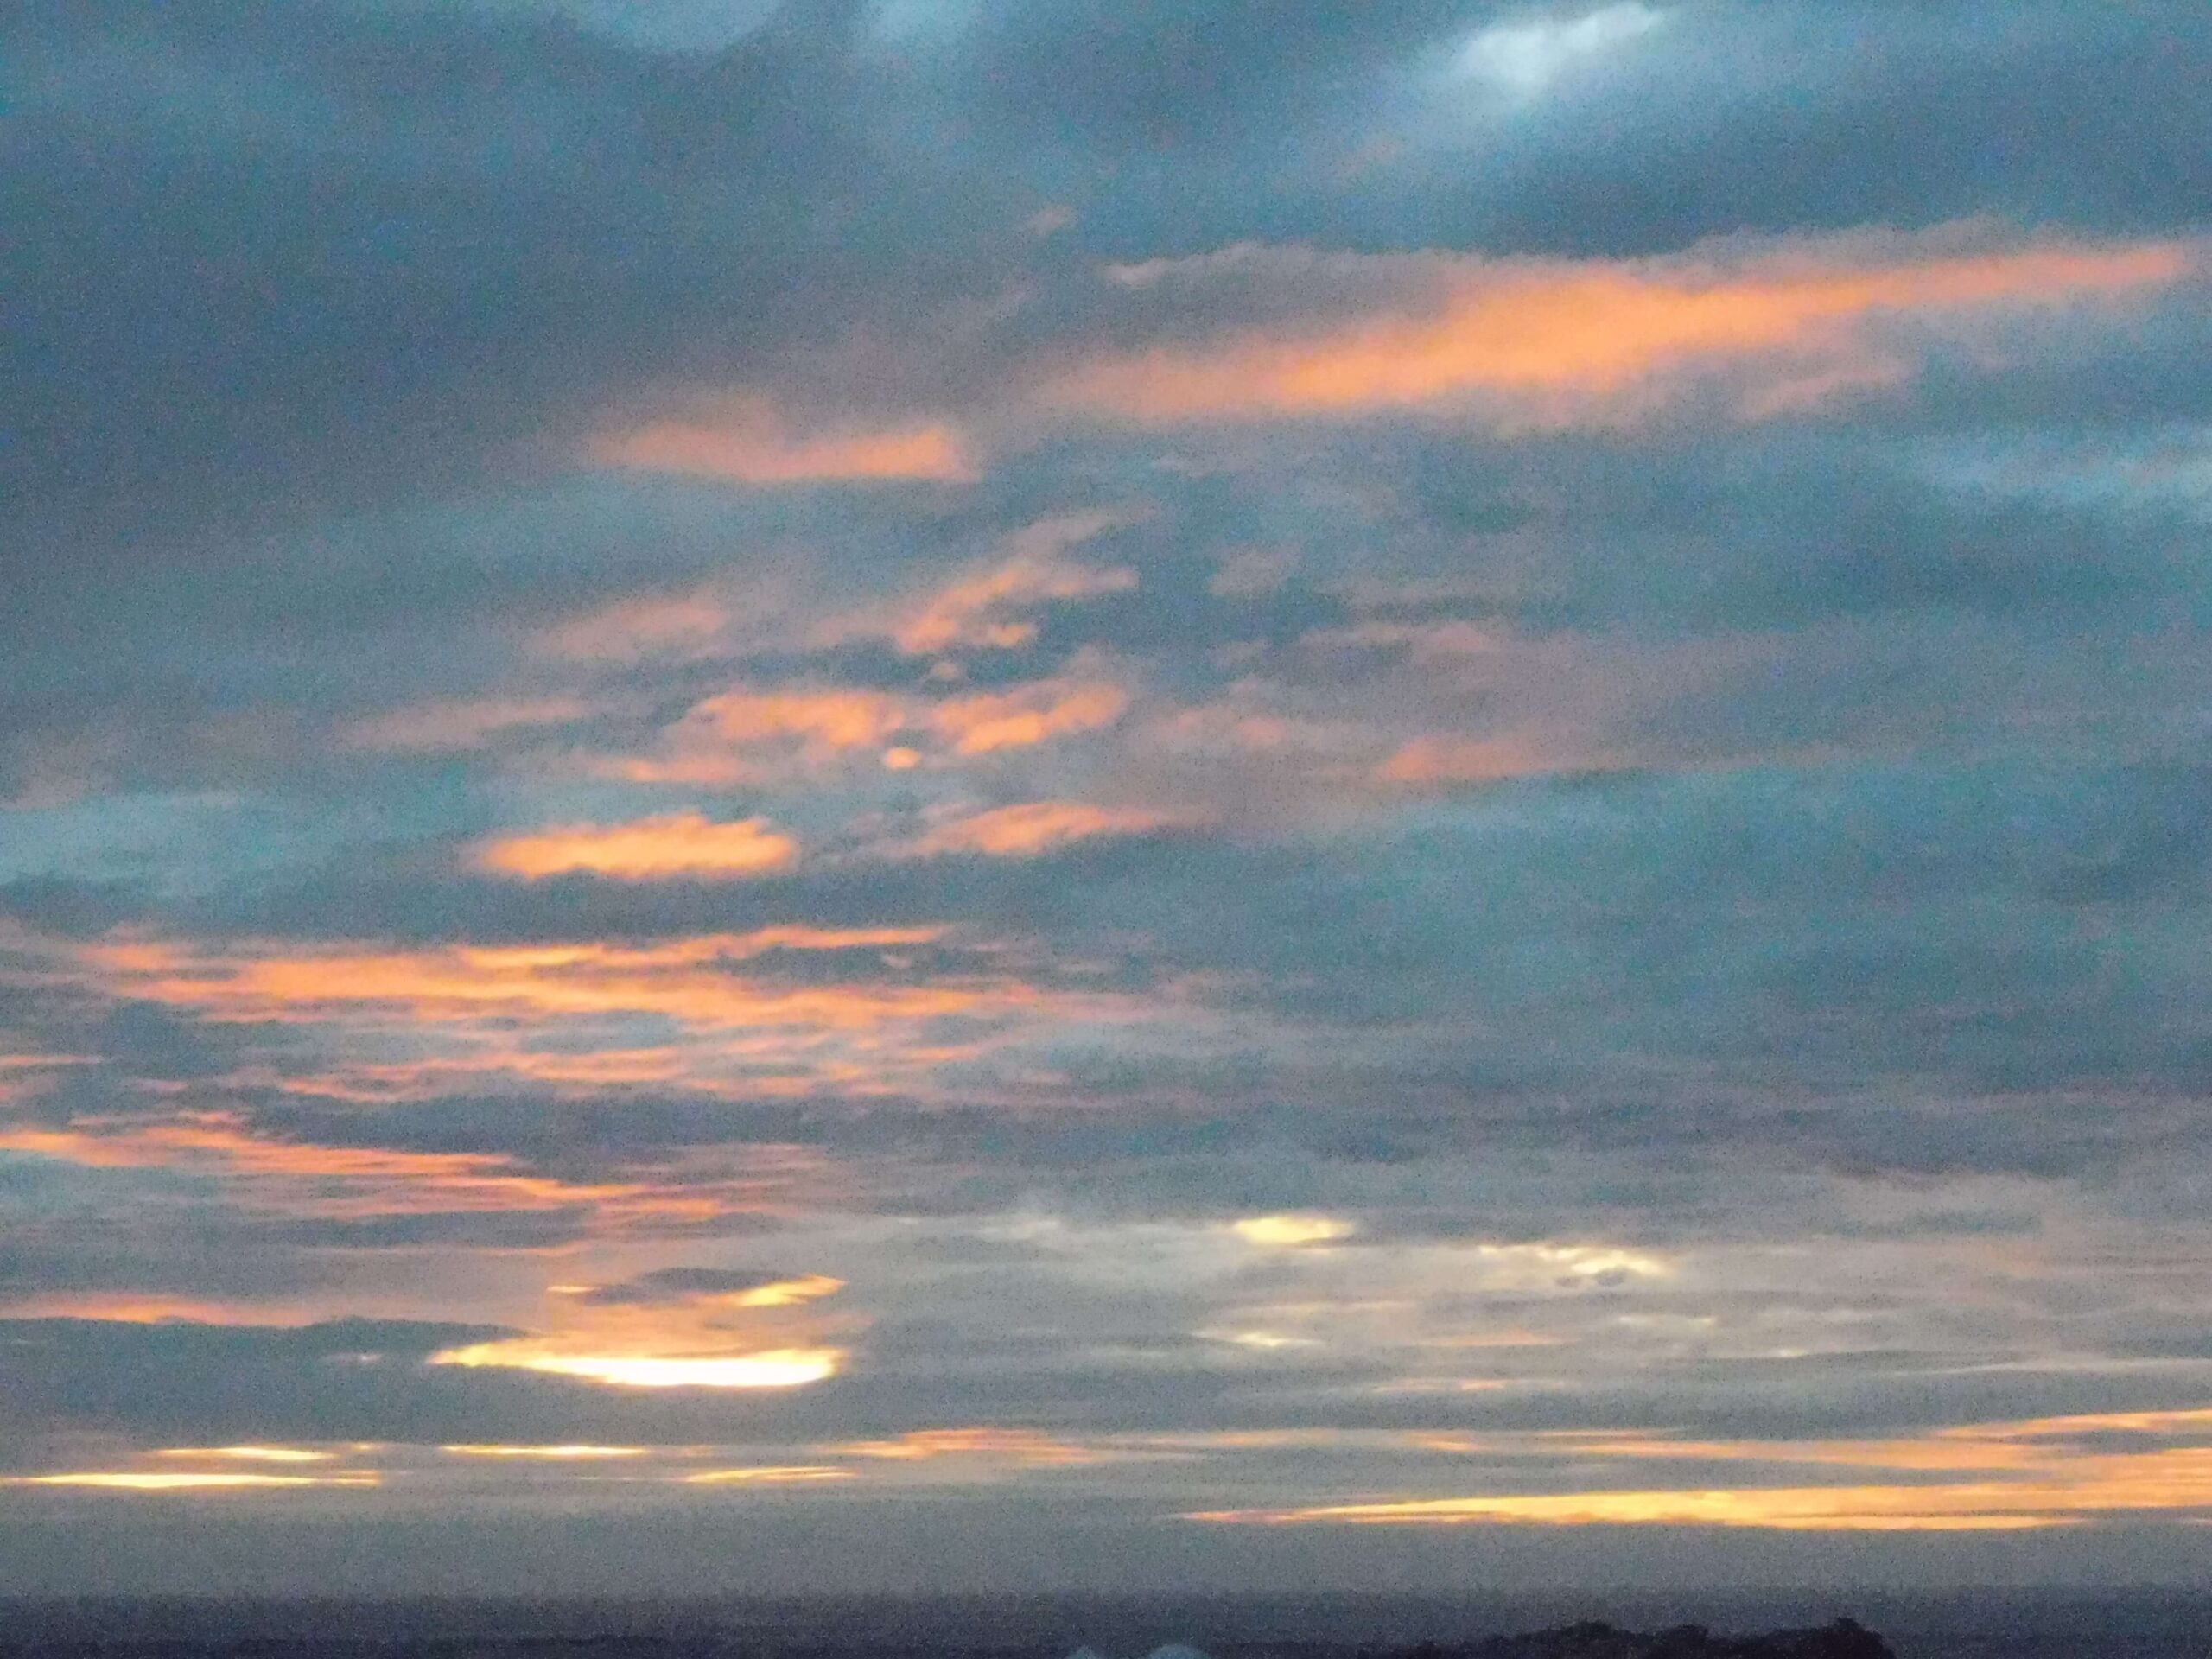 a cloudy sunset sky enfiladed with streaks and patches of gold and orange